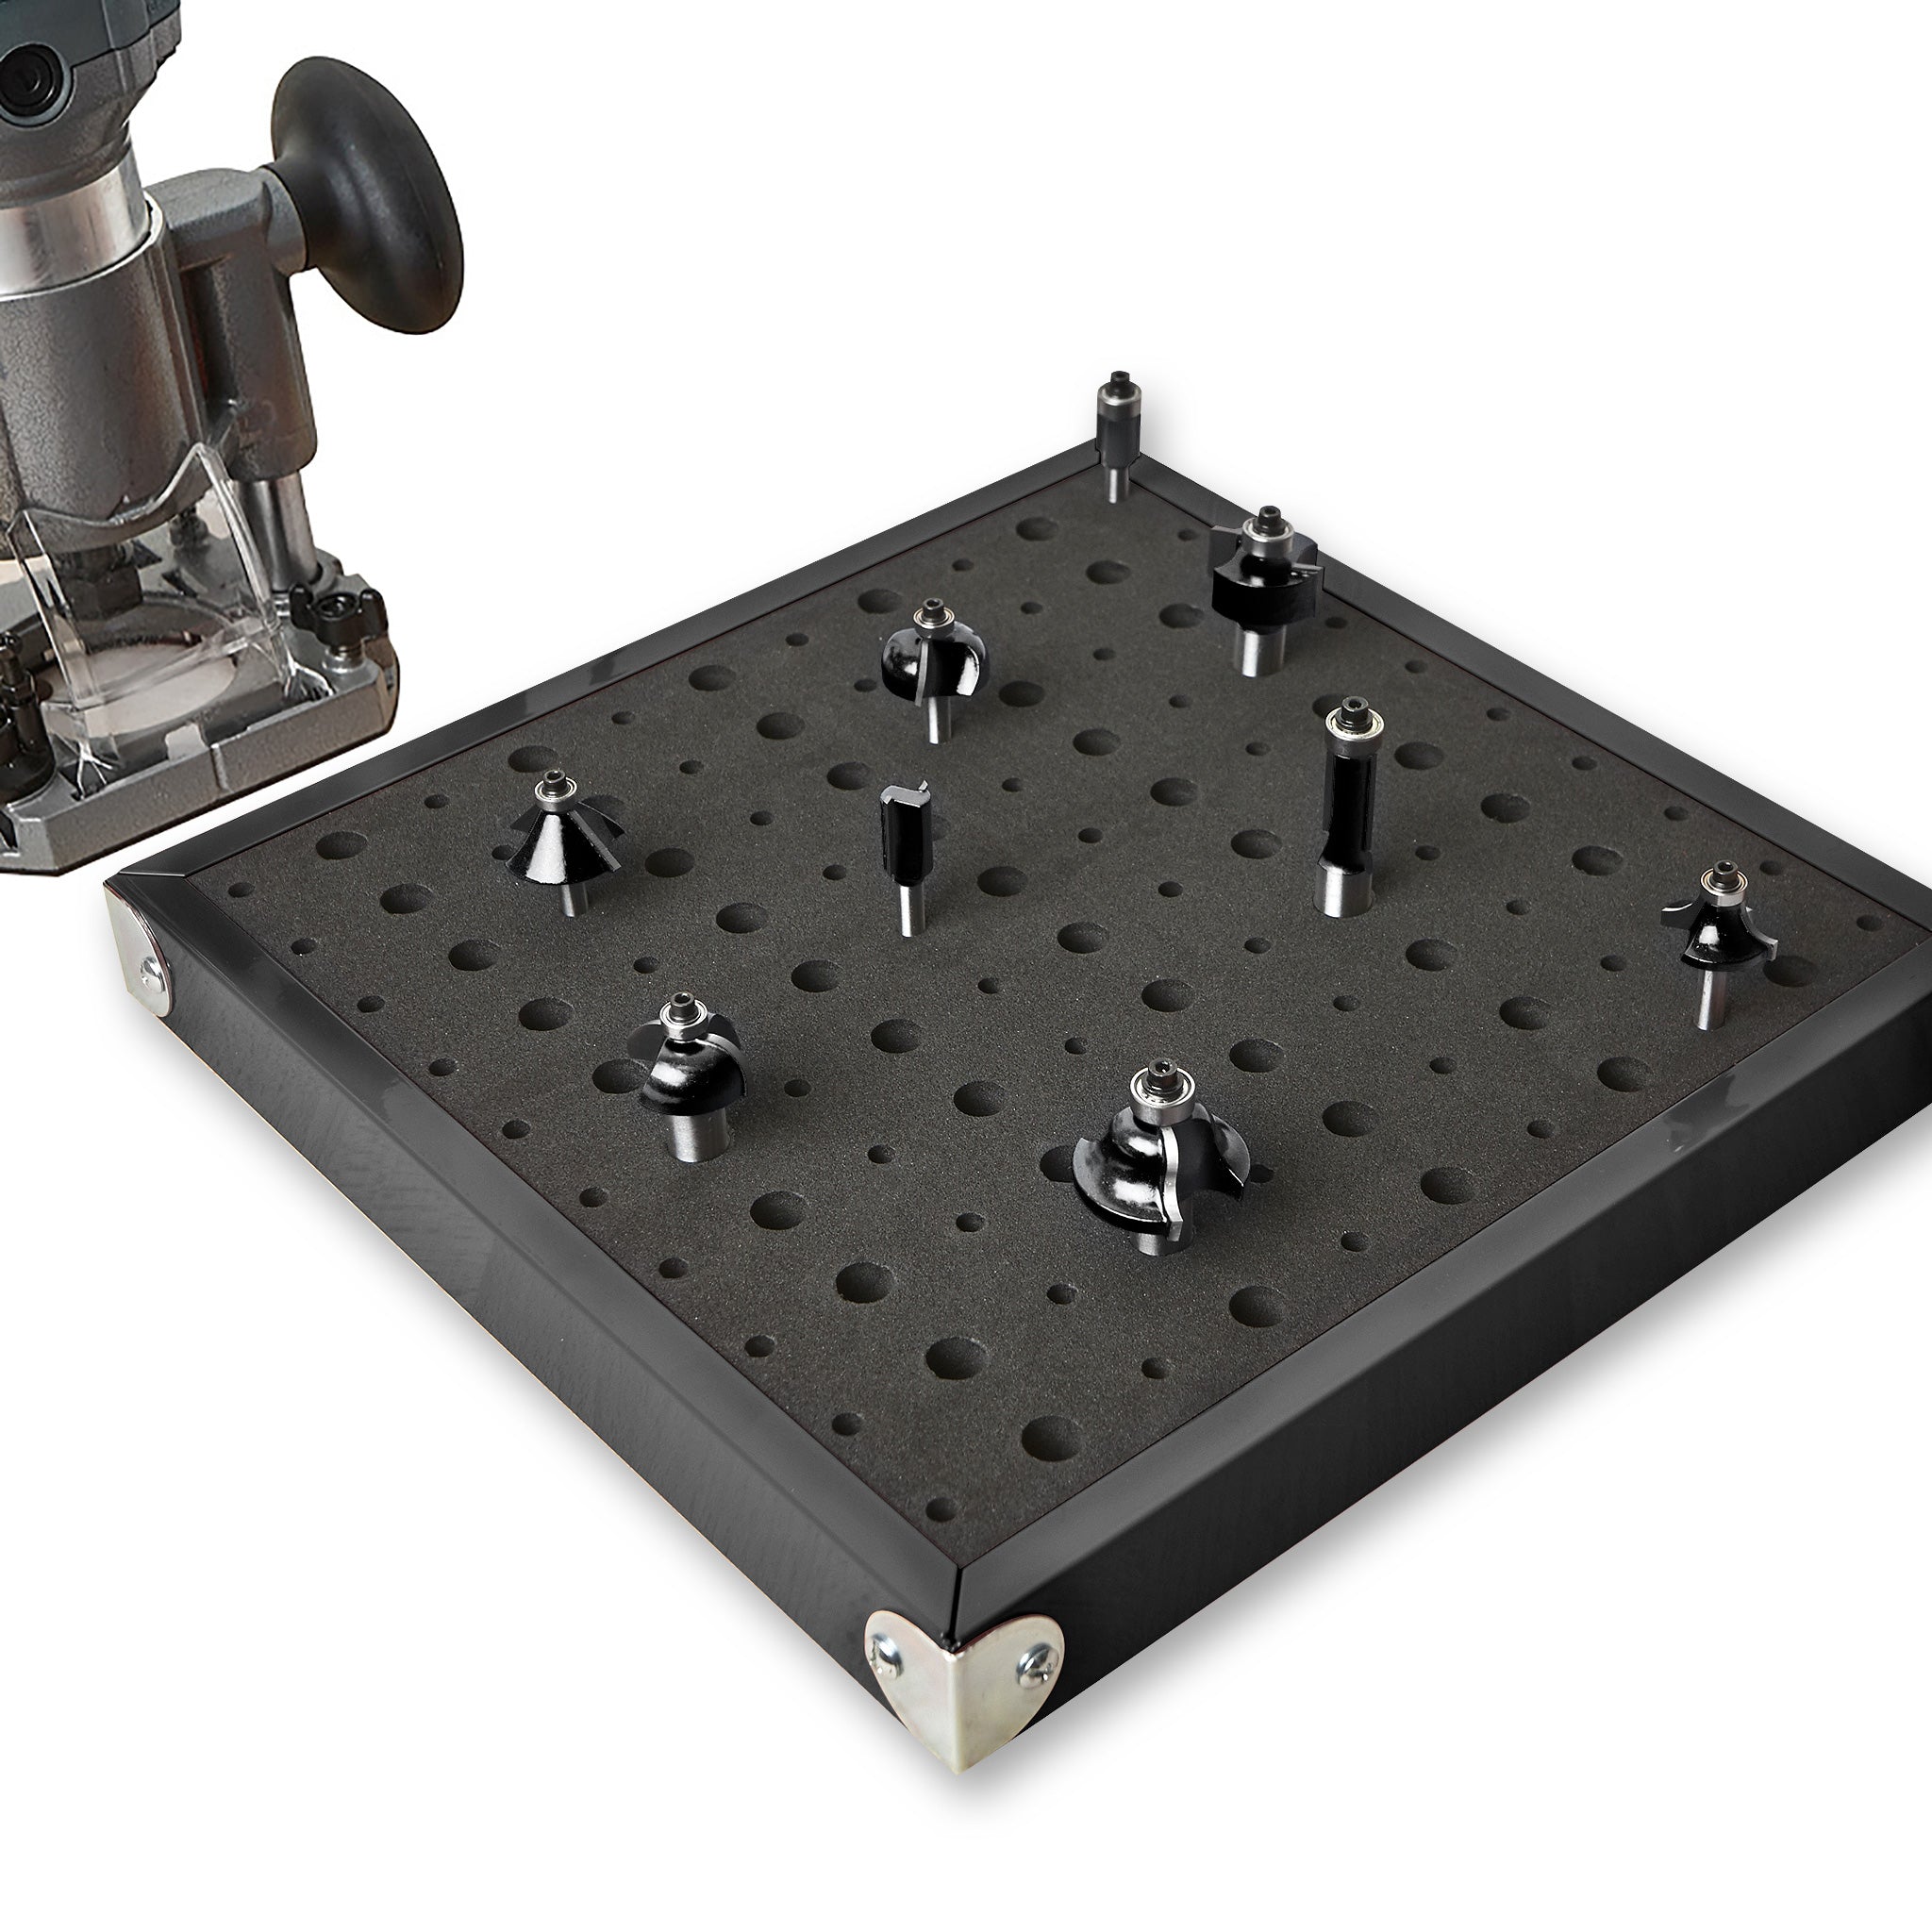 Router Bit Tray